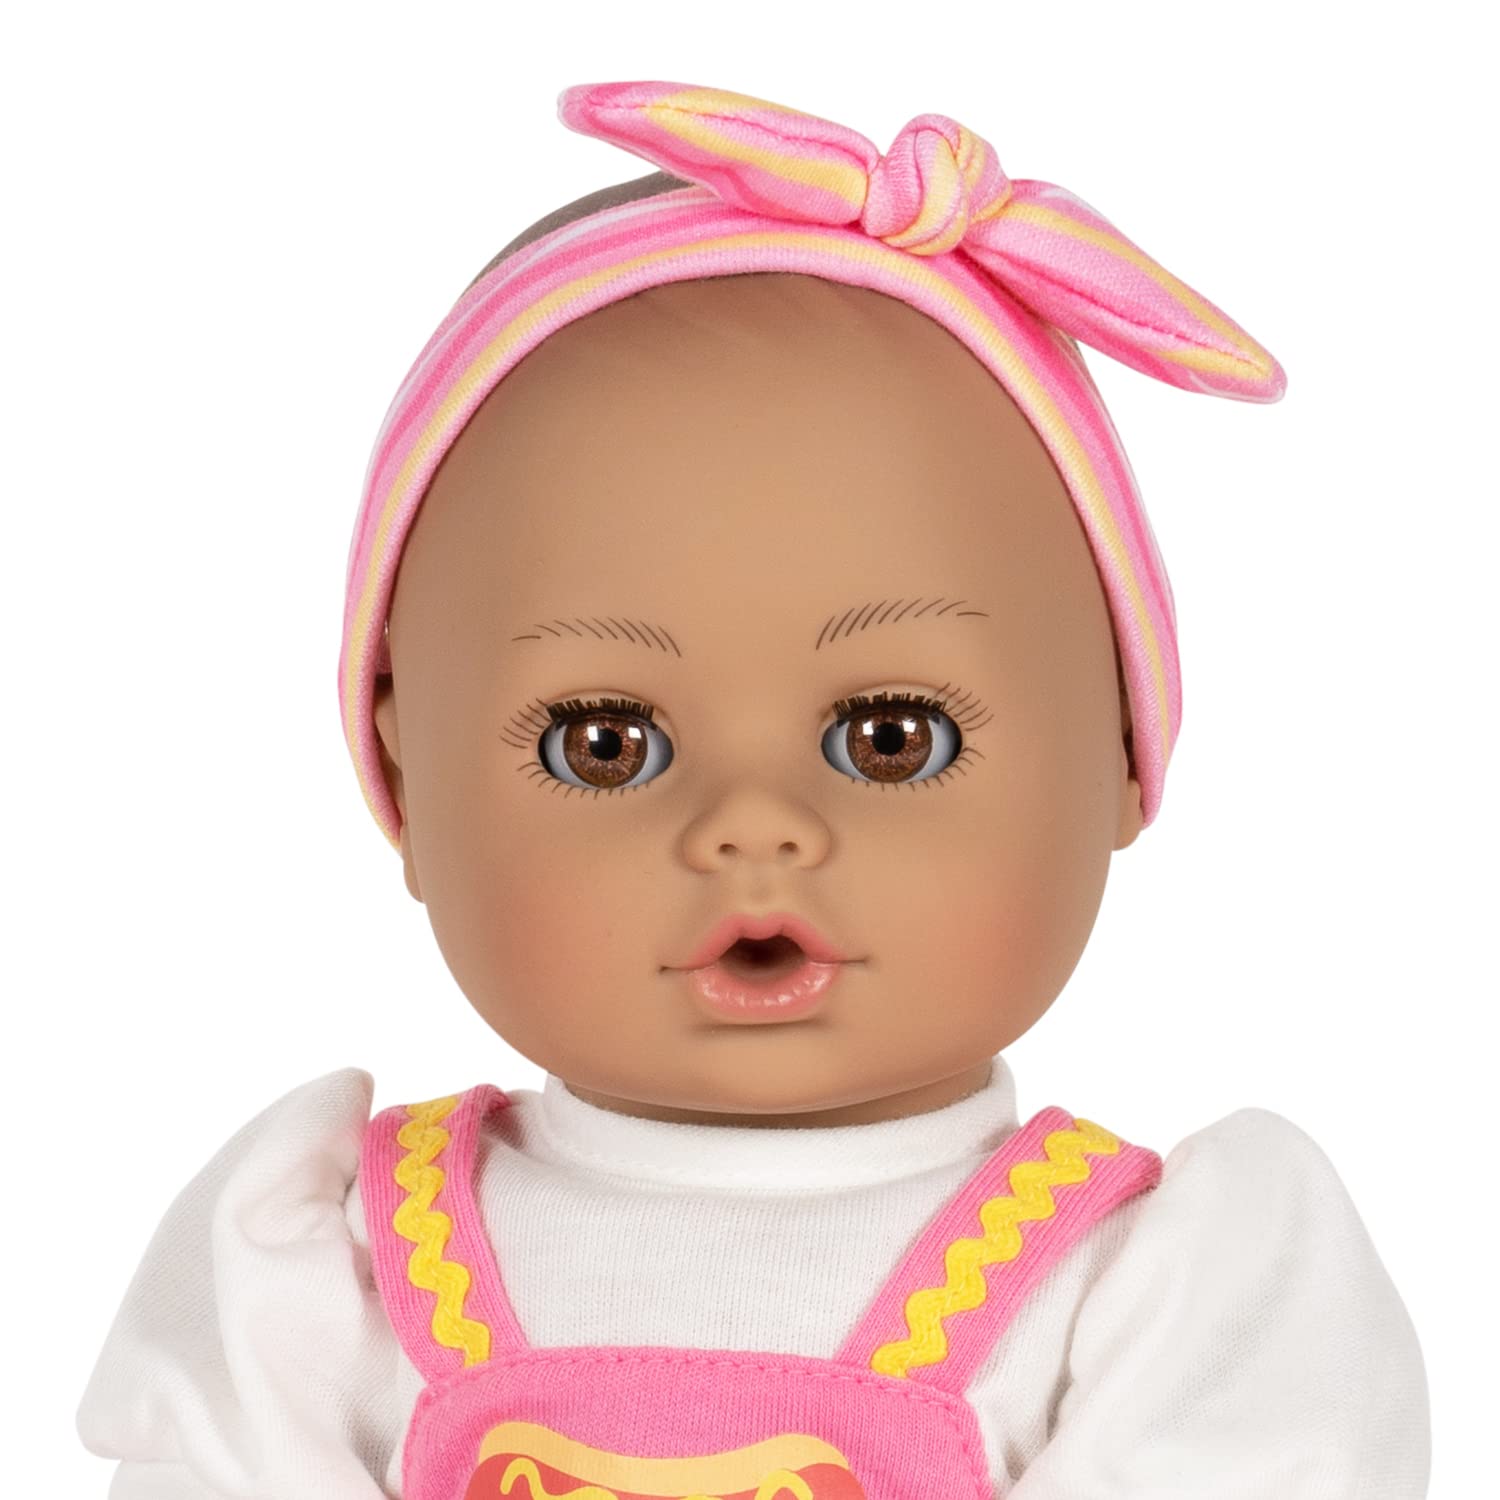 ADORA 13” Realistic Playtime Baby Doll in Exclusive Powder Scent GentleTouch Vinyl with Doll Clothes and Accessories for Imaginative and Interactive Play - Hot Diggity Dog